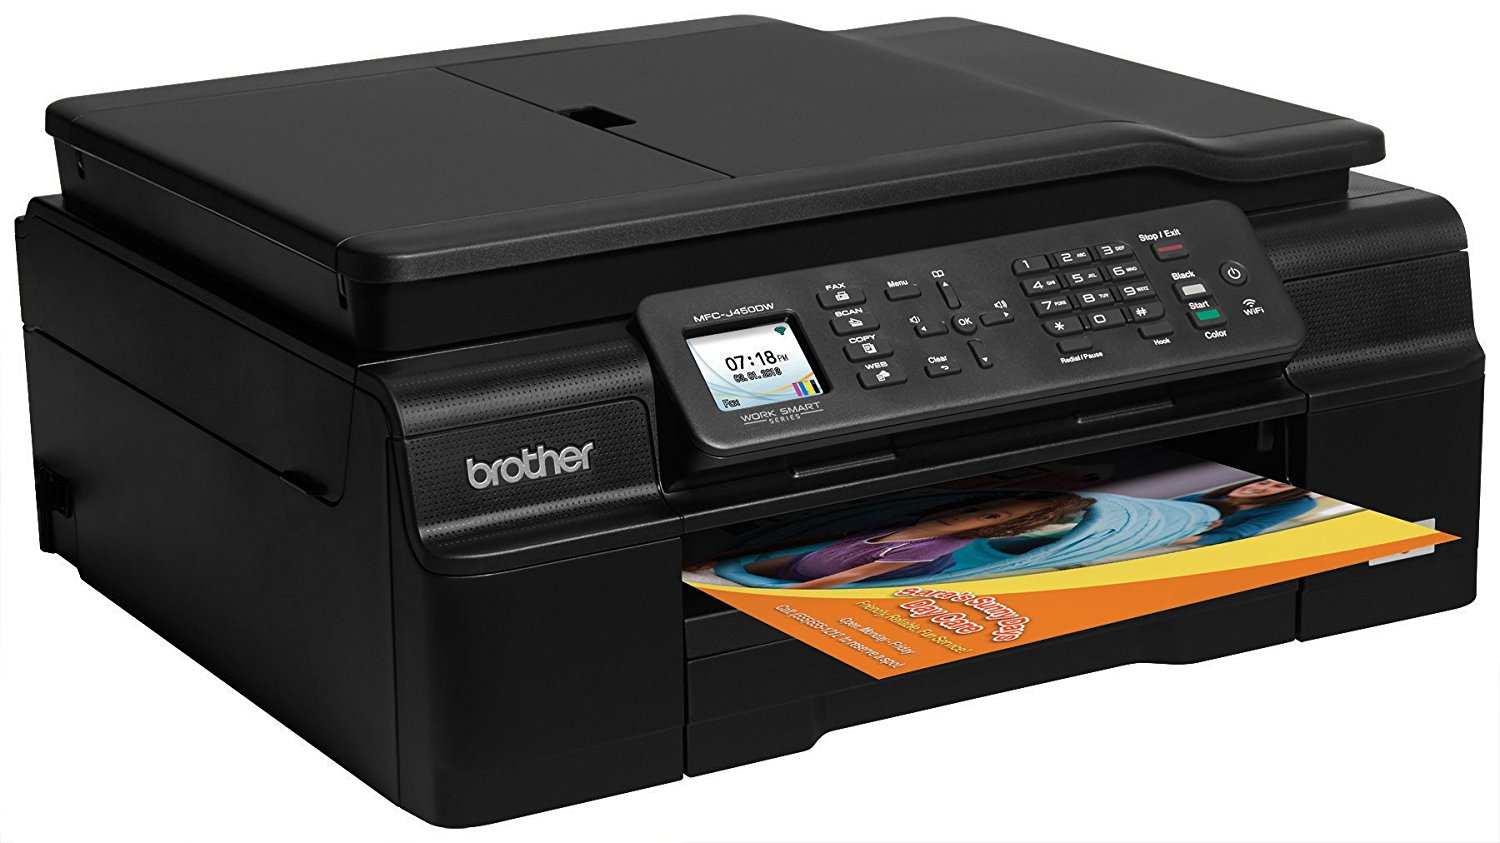 brothers printer drivers download